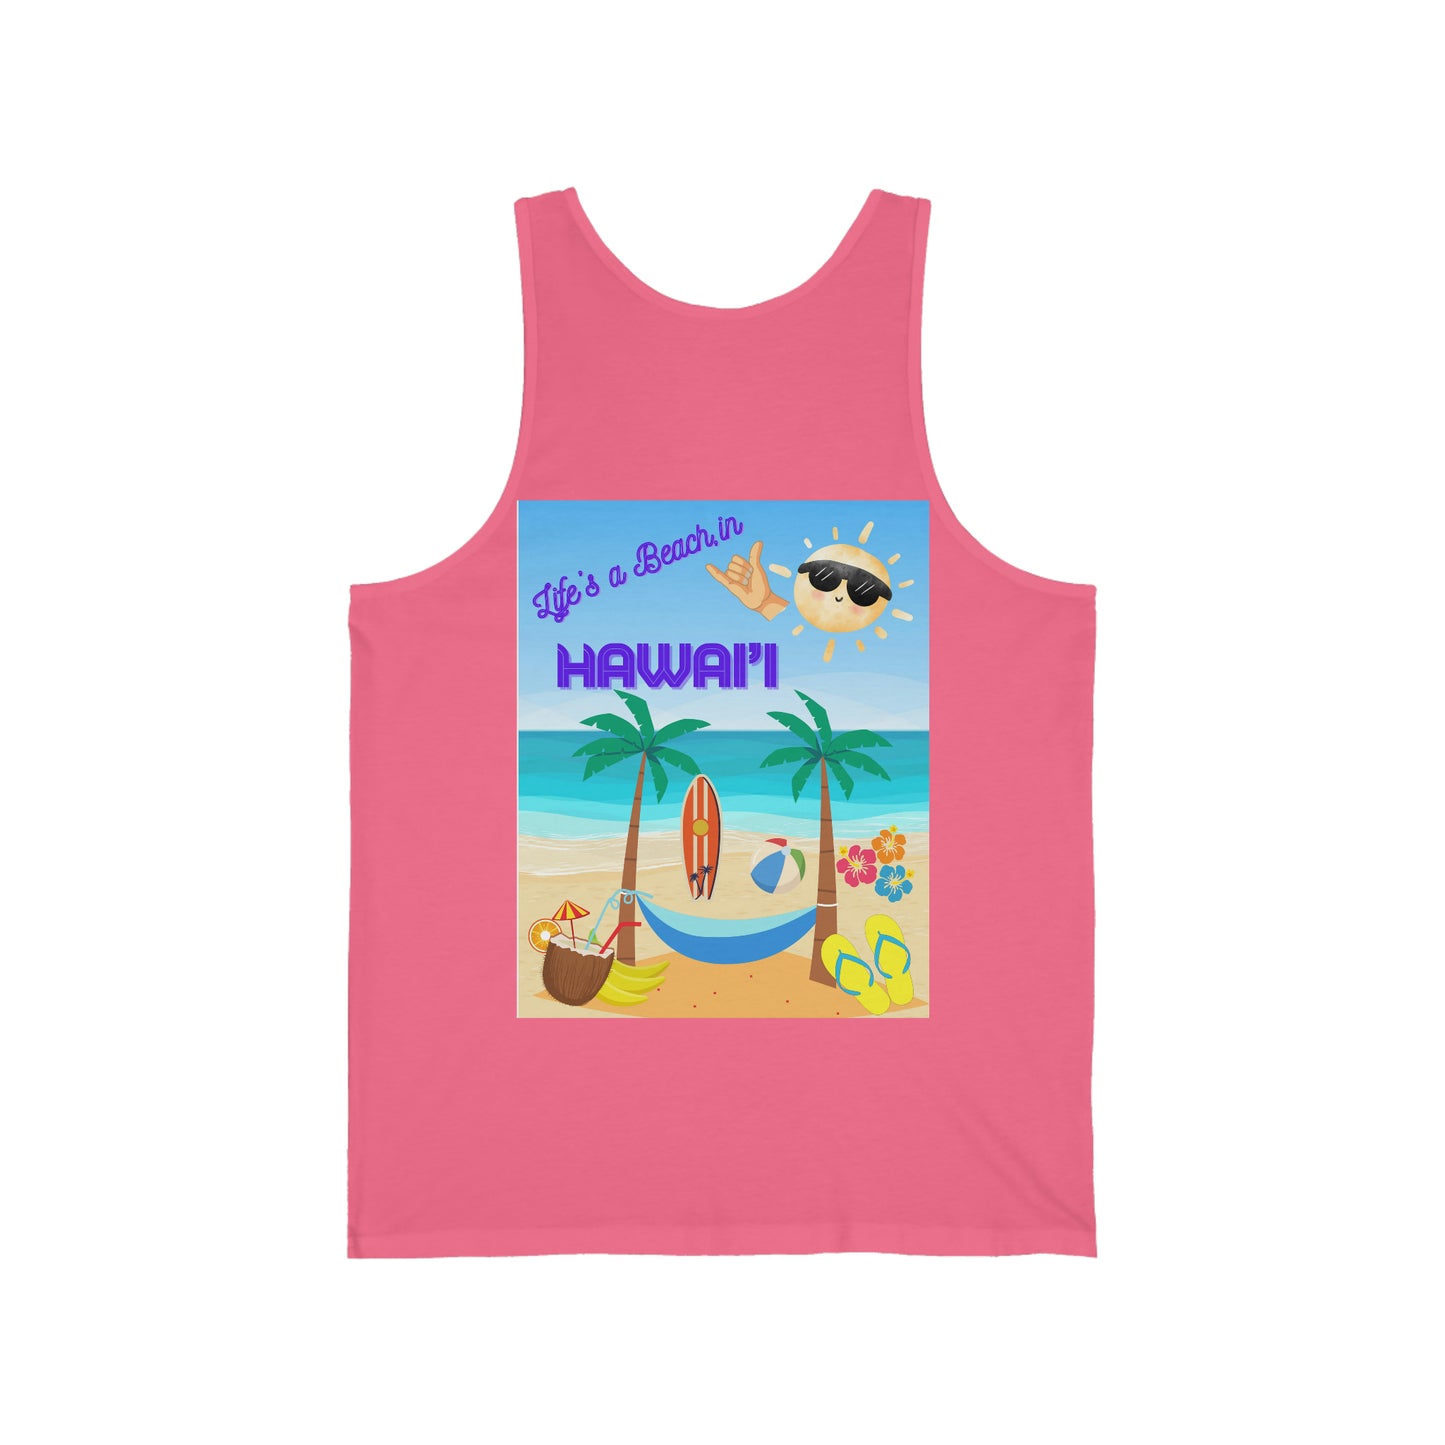 When Beach Is Life, Lifes a Beach In Hawaii Unisex Jersey Tank